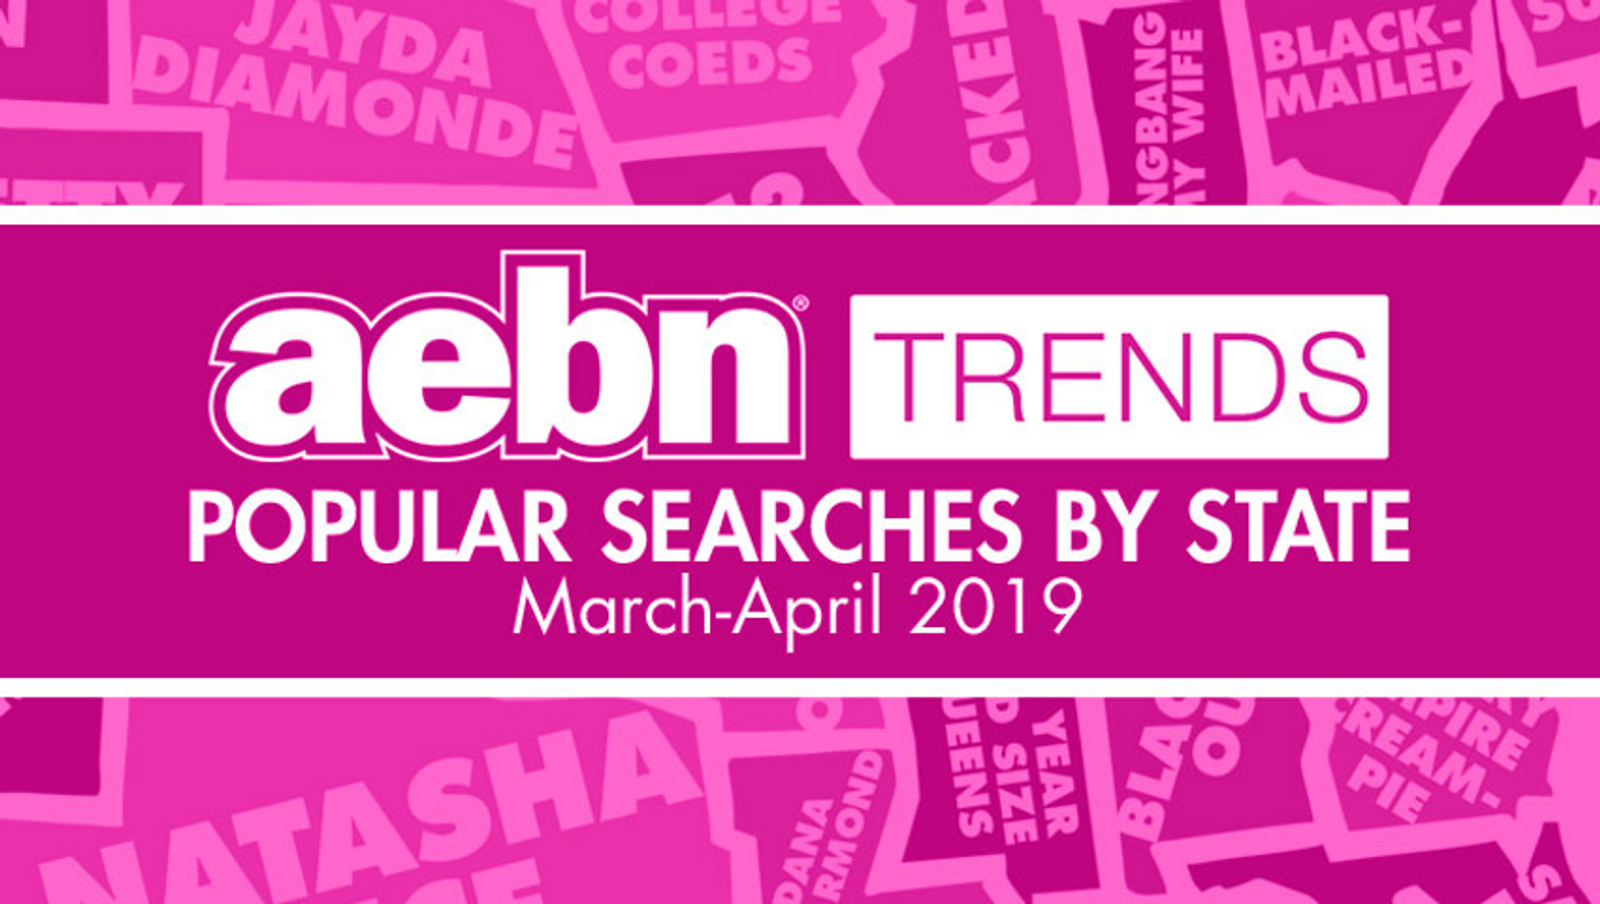 AEBN Publishes Popular Searches By State for March-April 2019